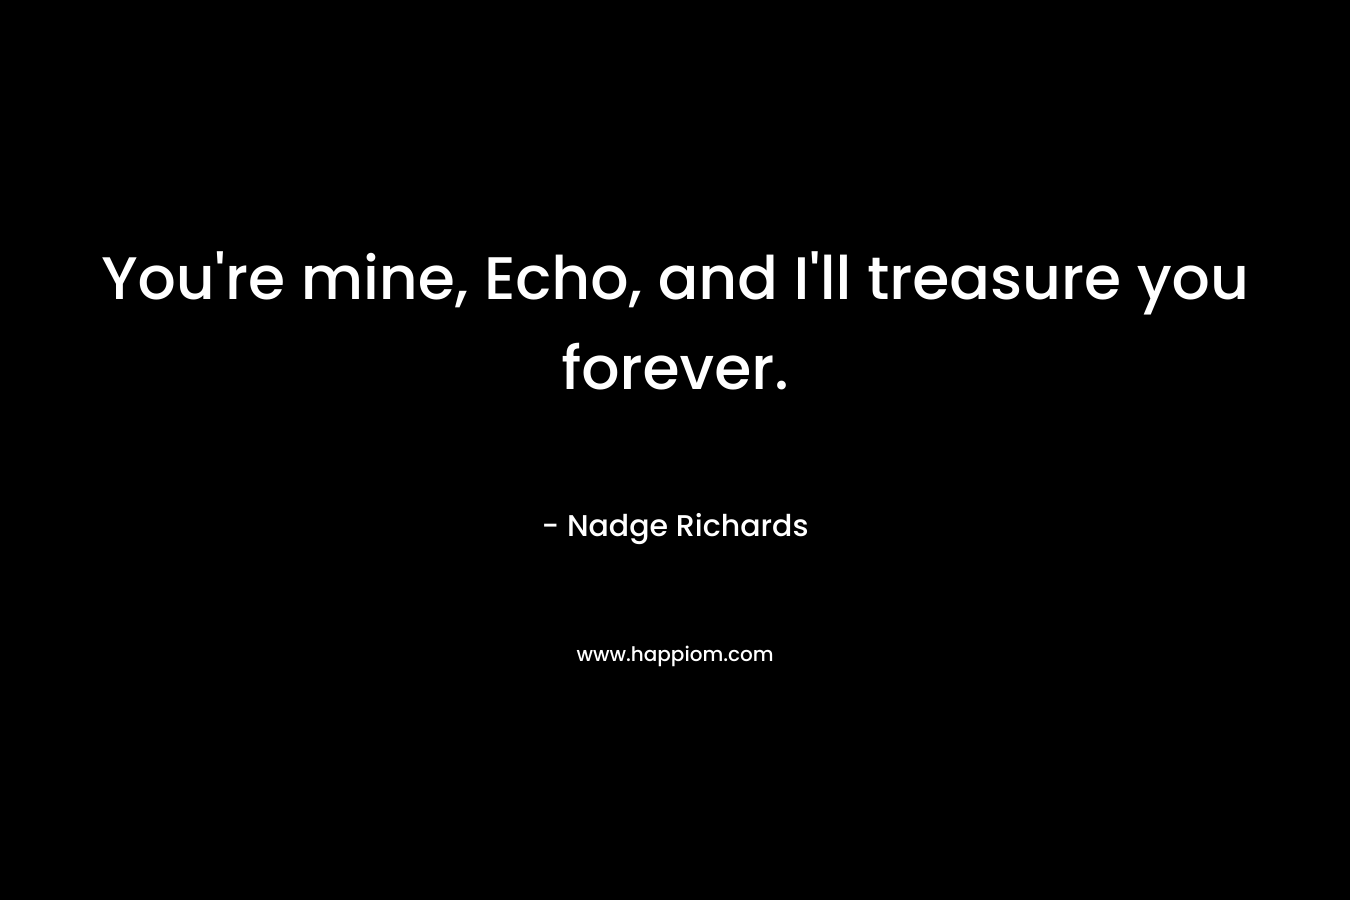 You're mine, Echo, and I'll treasure you forever.